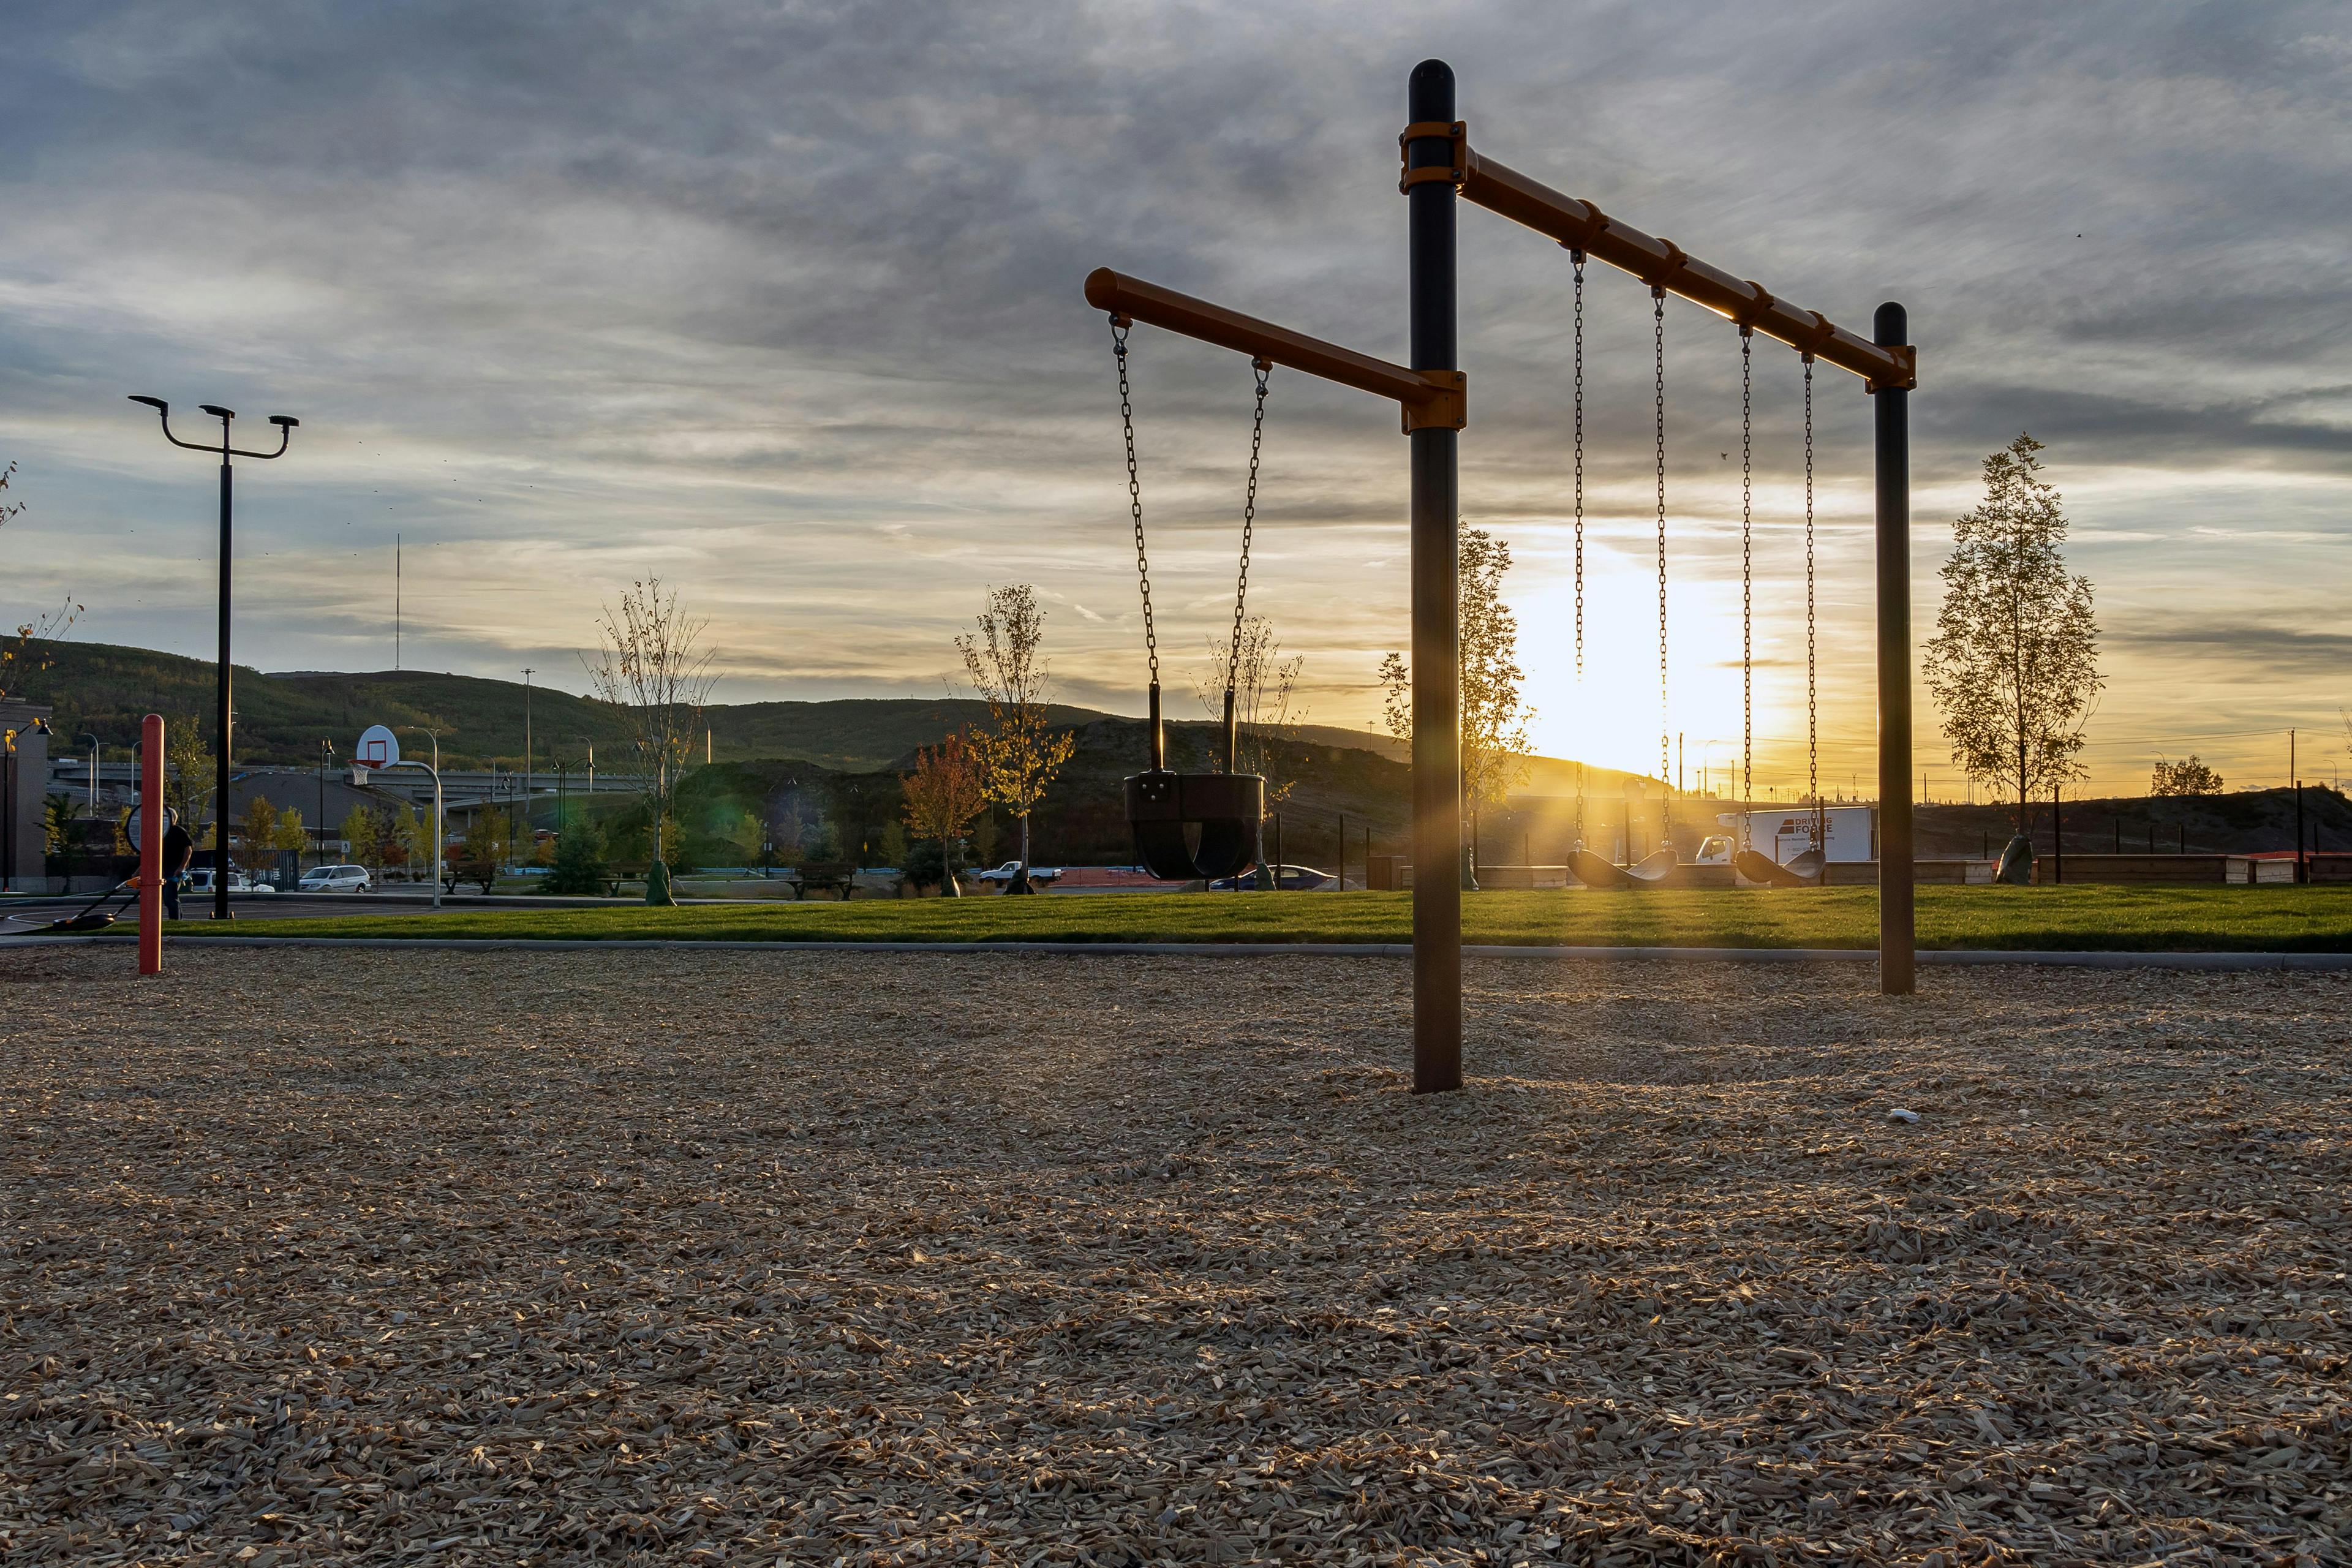 A swing set at a playground, photographed at sunset.